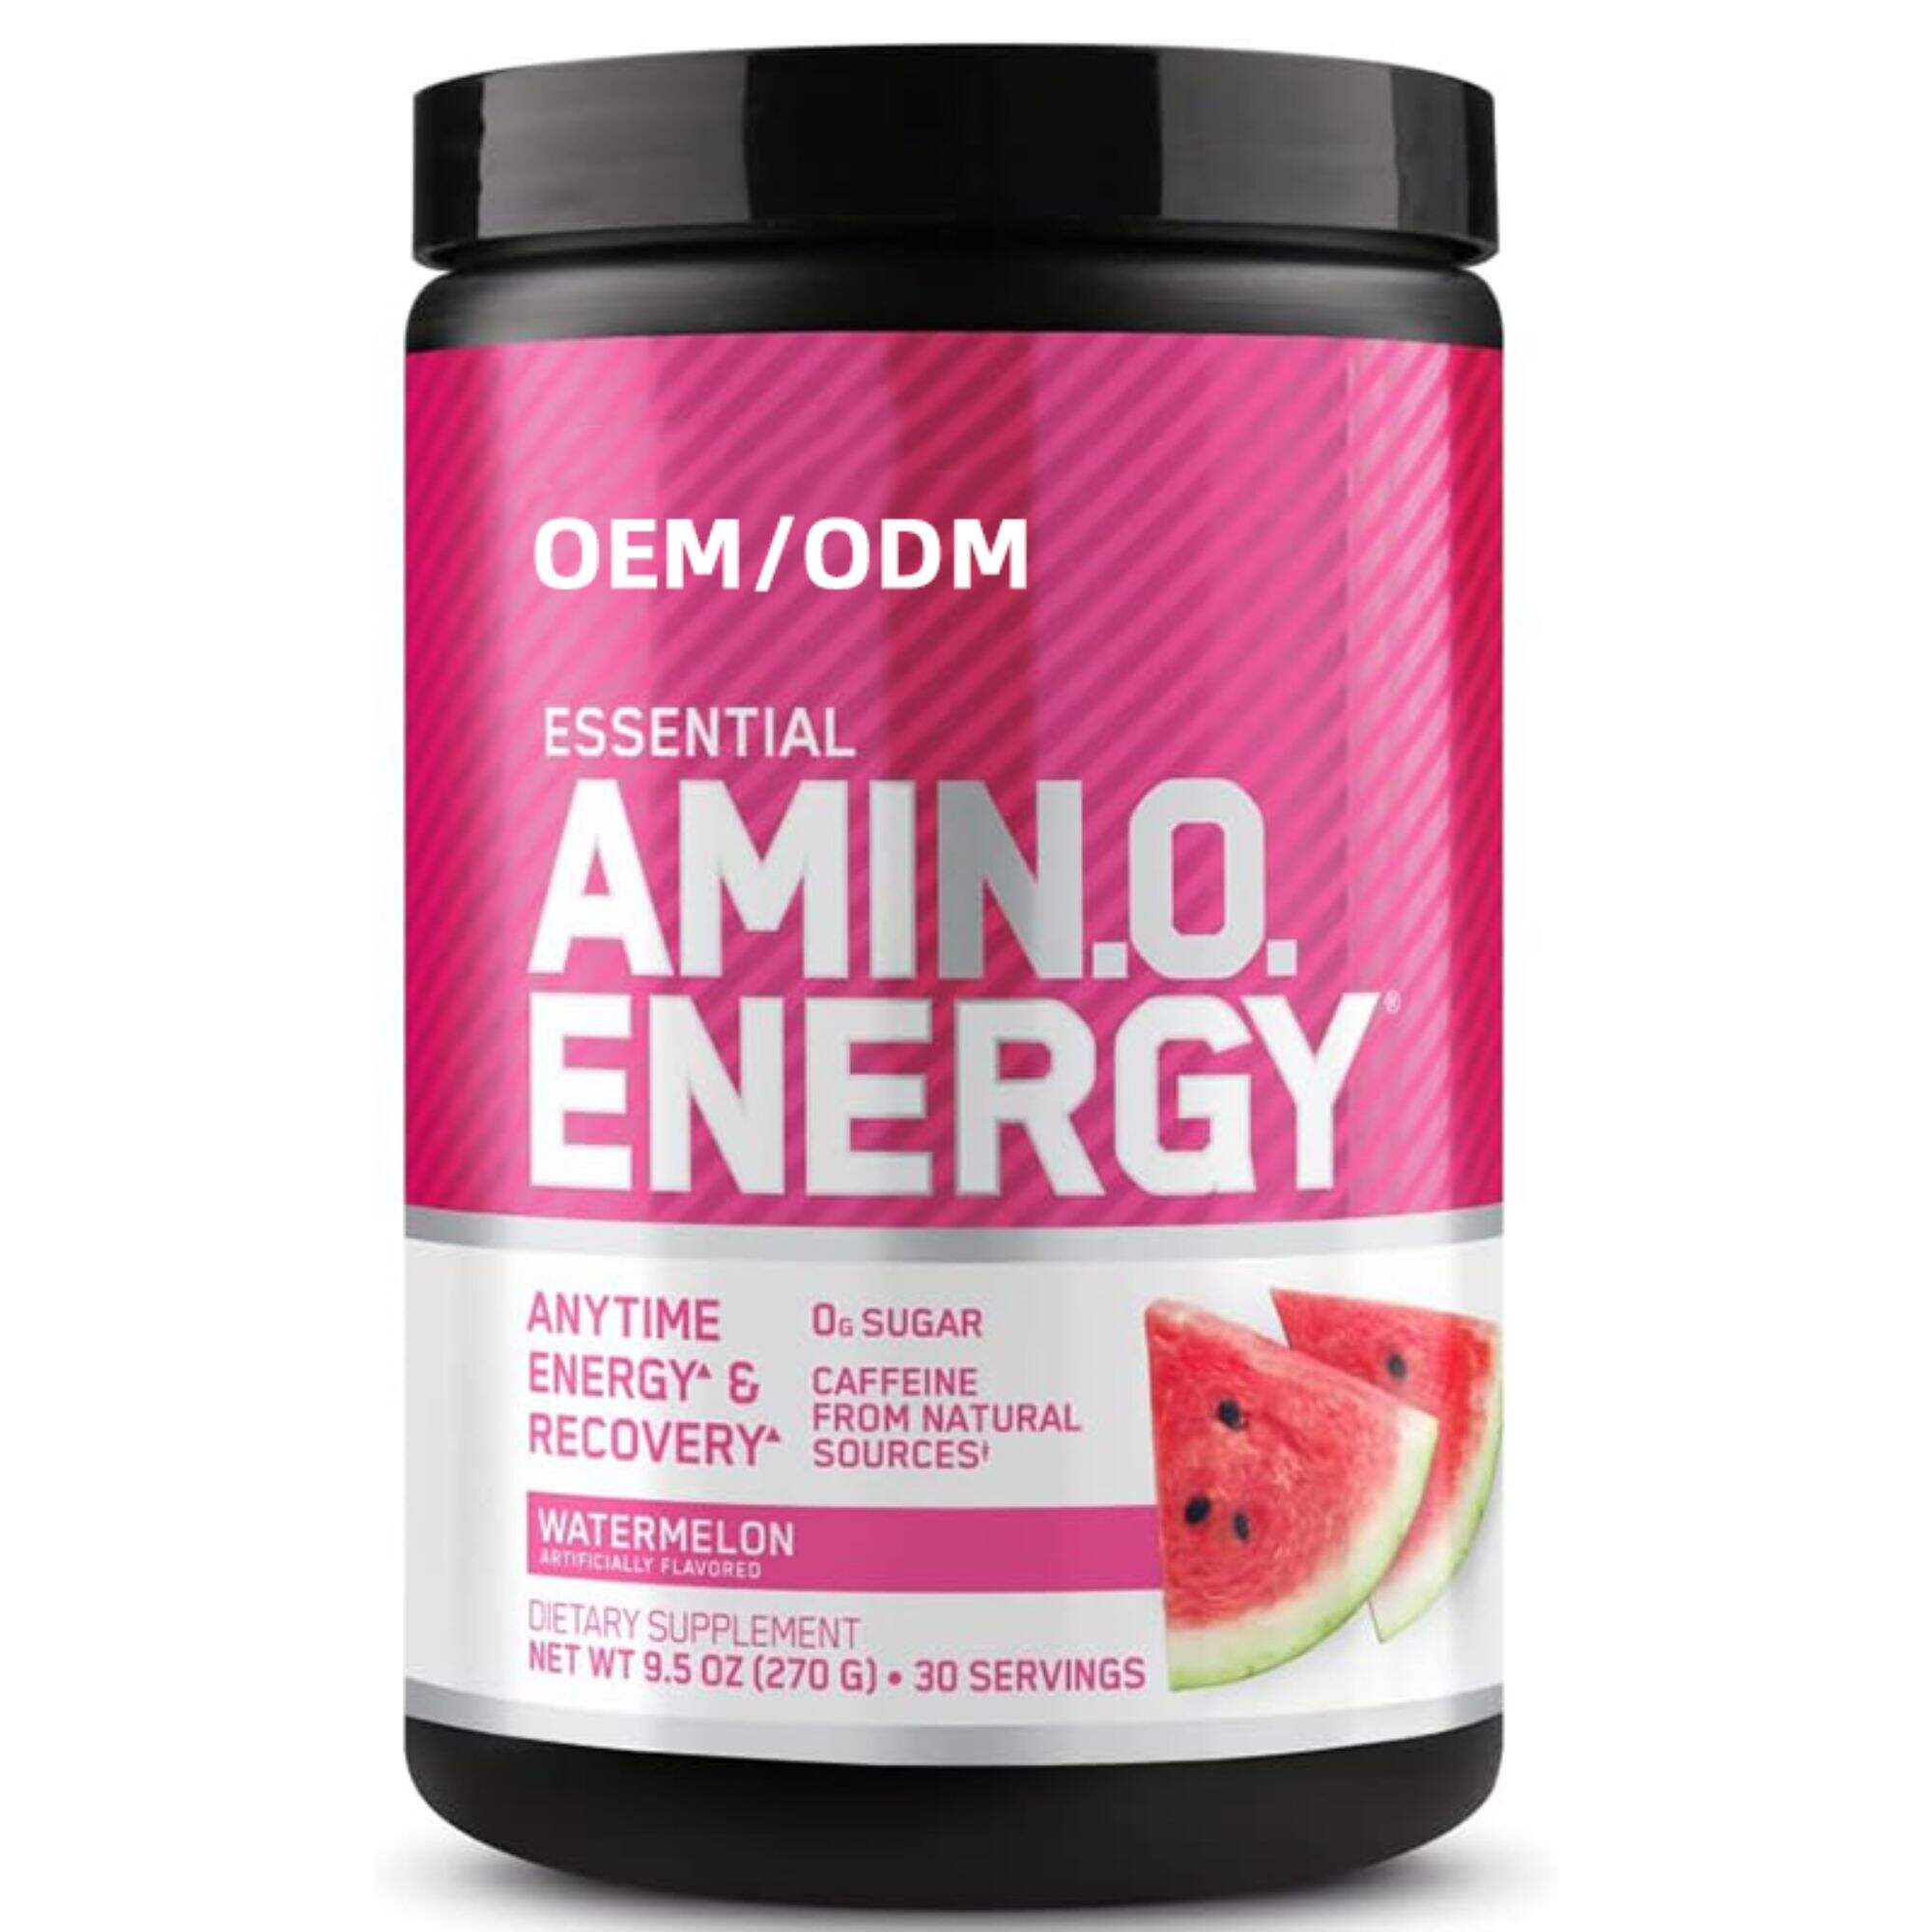 Amino Energy - Pre Workout with Green Tea, BCAA, Amino Acids, Keto Friendly, Green Coffee Extract, Energy Powder - Watermelon, 30 Servings 